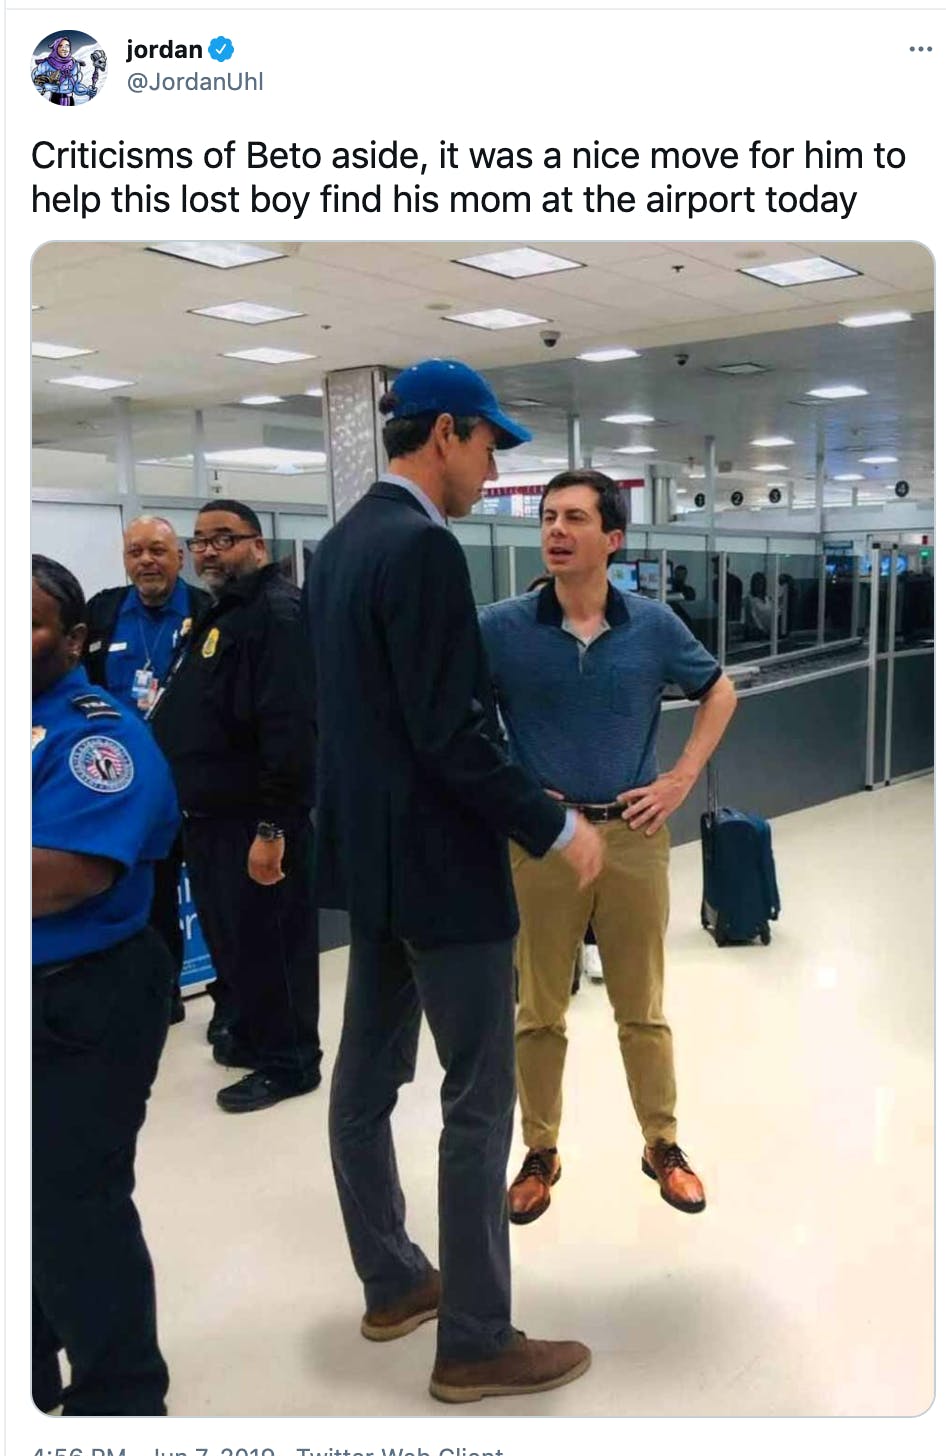 pette buttigieg with beto o'rourke showing his height